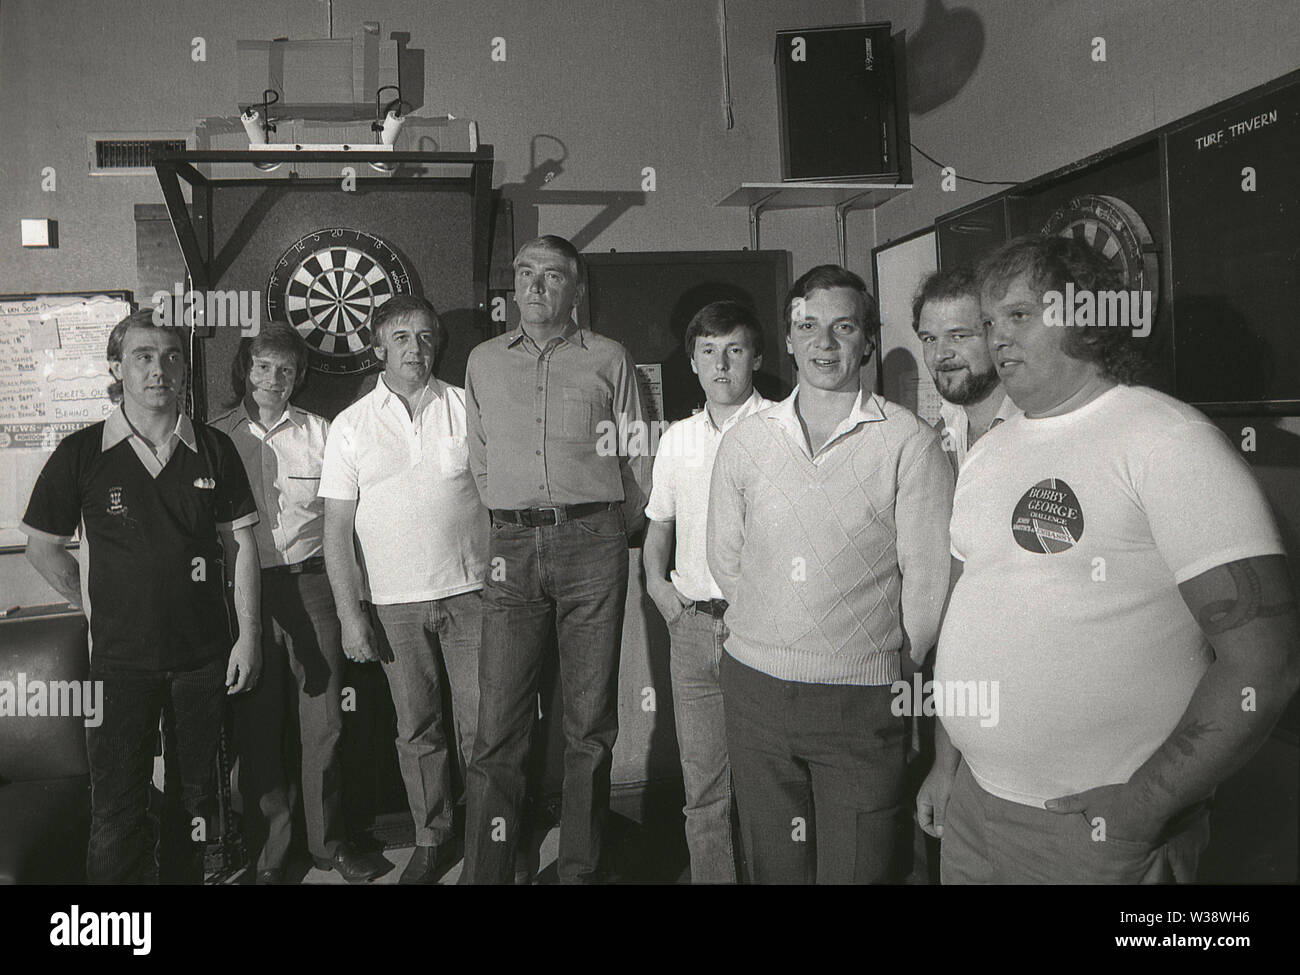 1980s, photo showing the inside of a pub with dart boards and a team of ...